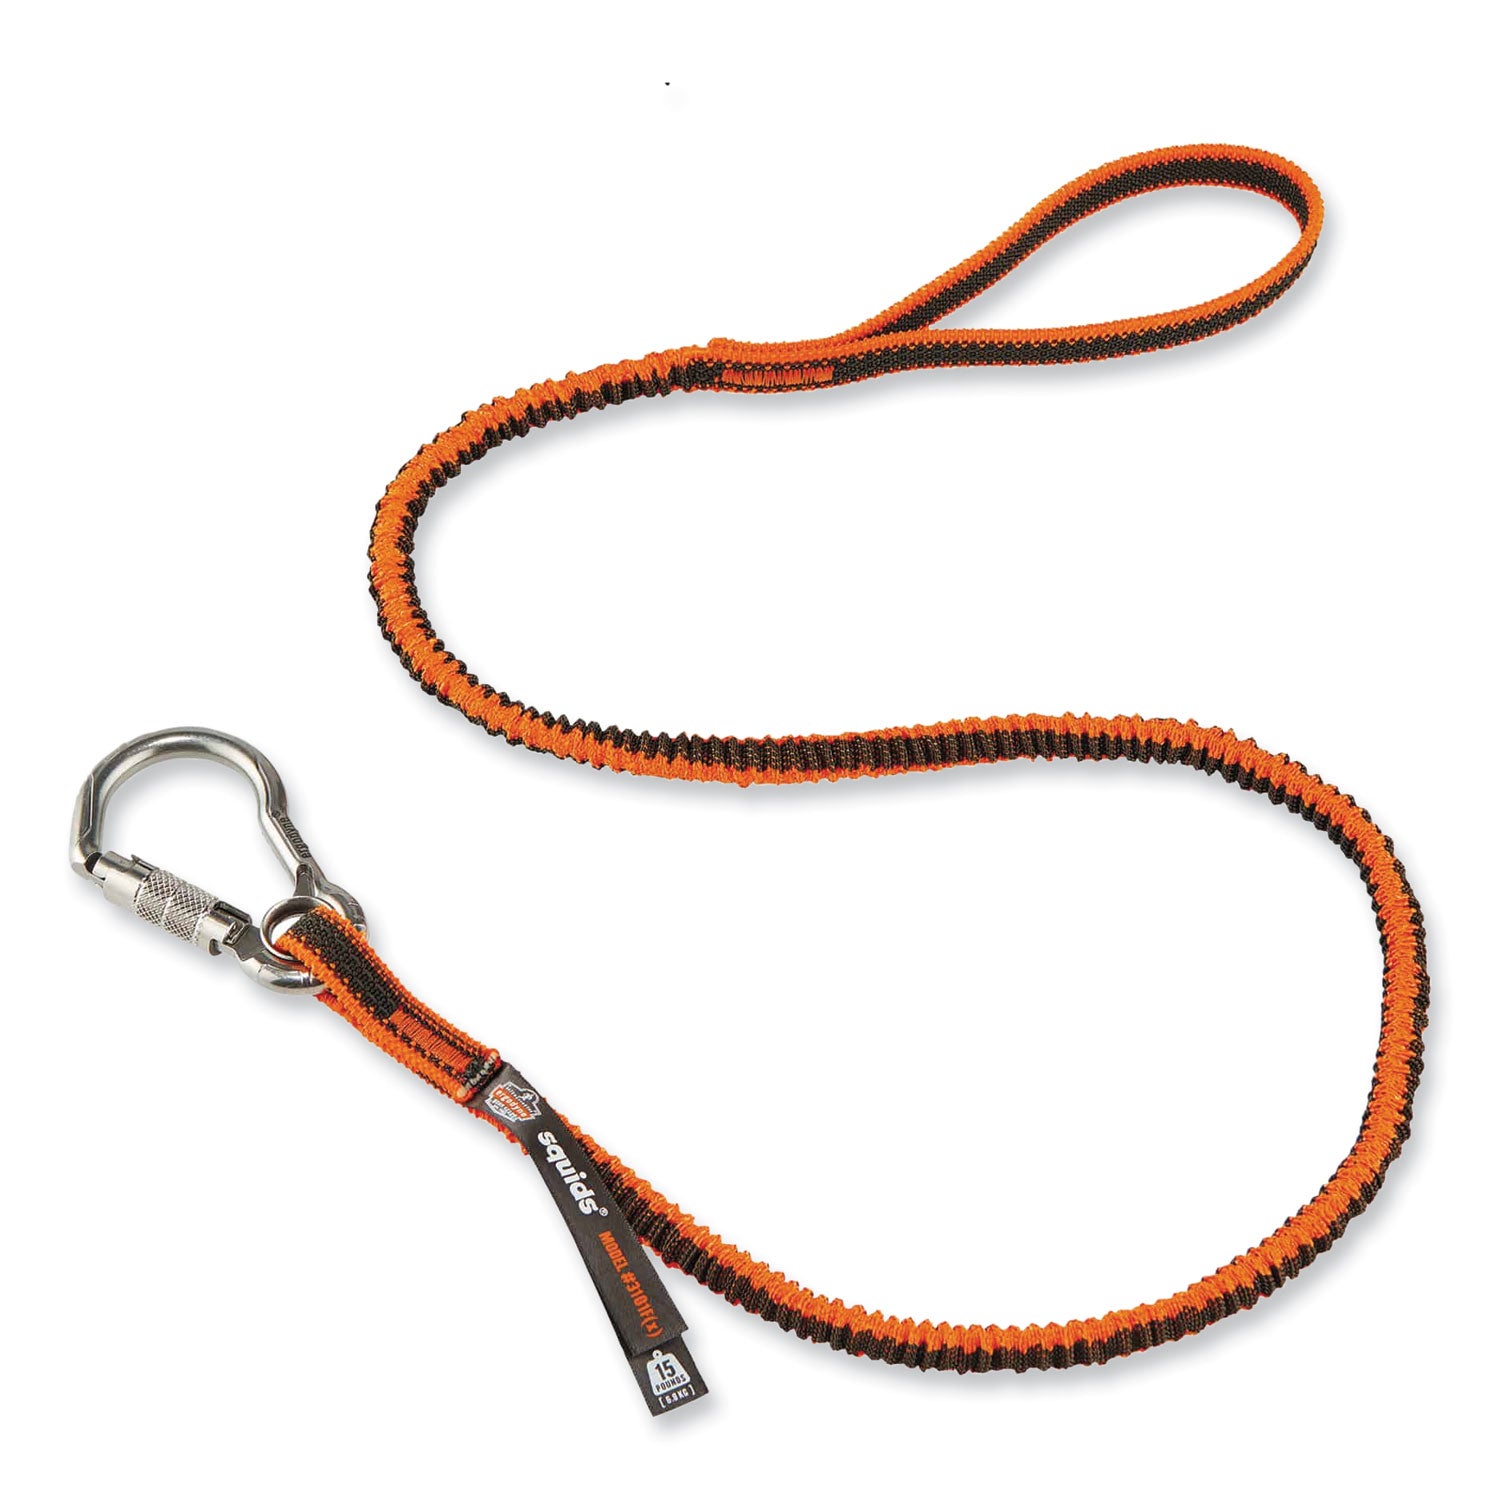 squids-3101fx-tool-lanyard-w-stainless-steel-carabiner-+-loop-15-lb-max-work-cap-38-to-48-ships-in-1-3-business-days_ego19803 - 1